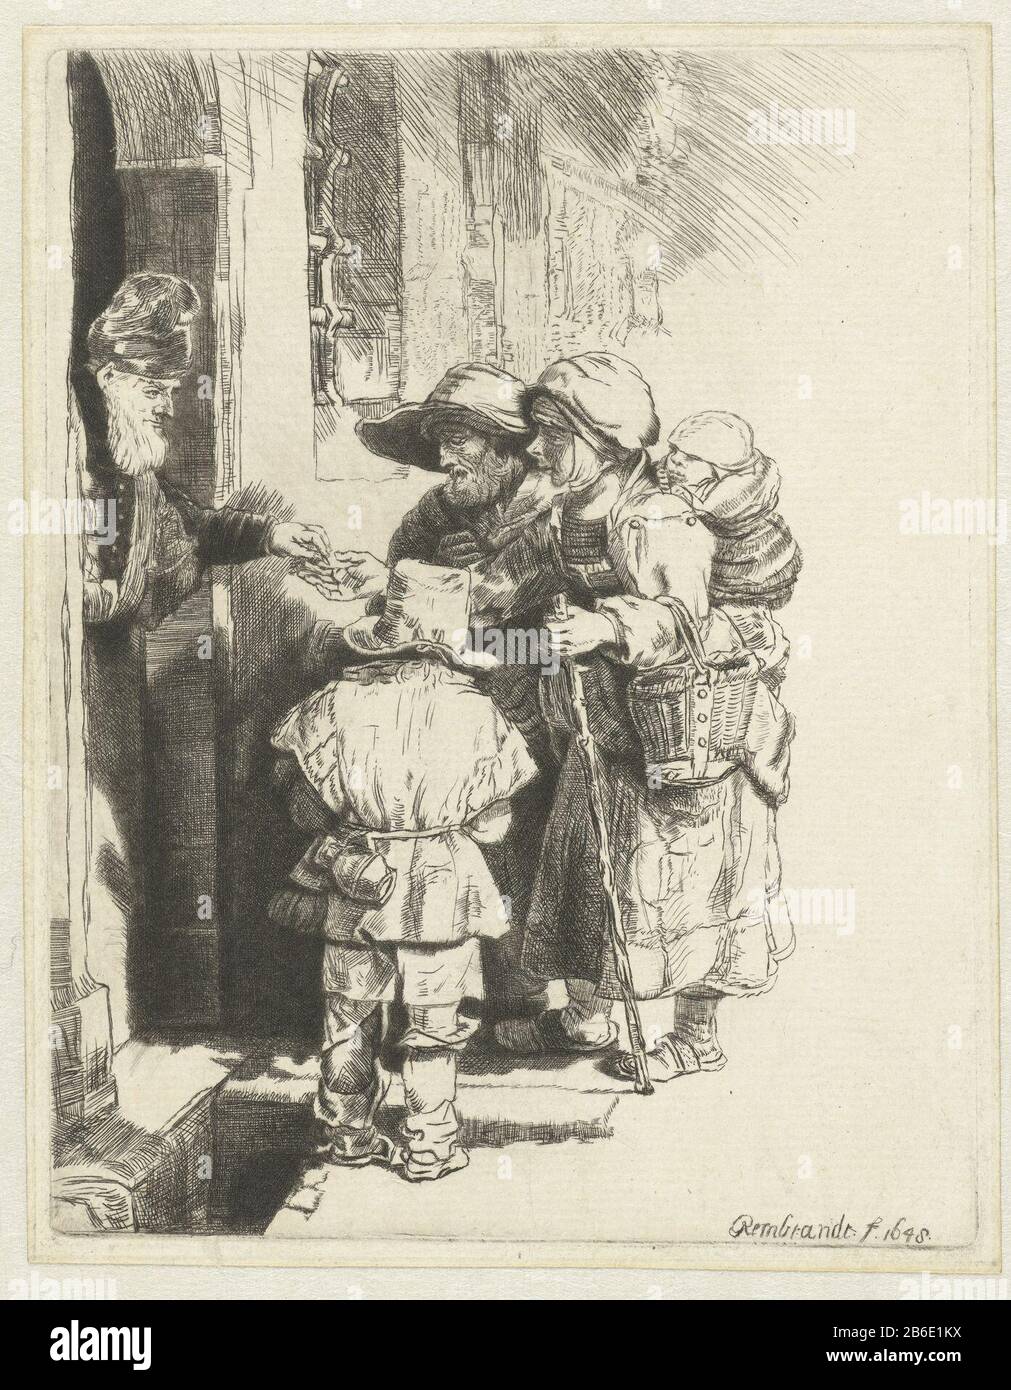 Blind draailierspeler with family receives a handout at the door of a house Blind Hurdy Gurdy Player with family receives alms at the door of a house Object type: picture Item number: RP-P-OB-12.351Catalogusreferentie: New Hollstein Dutch and Flemish (Rembrandt text) 243-copy d Inscriptions / Brands: collector's mark , verso, stamped: Lugt 240 Manufacturer : printmaker William Baillie to print by Rembrandt van Rijn Date: 1733 - 1810 Material: paper Technique: etching / drypoint dimensions: plate edge: h 164 mm × W 126 mm Subject: hurdy-gurdy player - CC - out of by gi alms; collection and Stock Photo